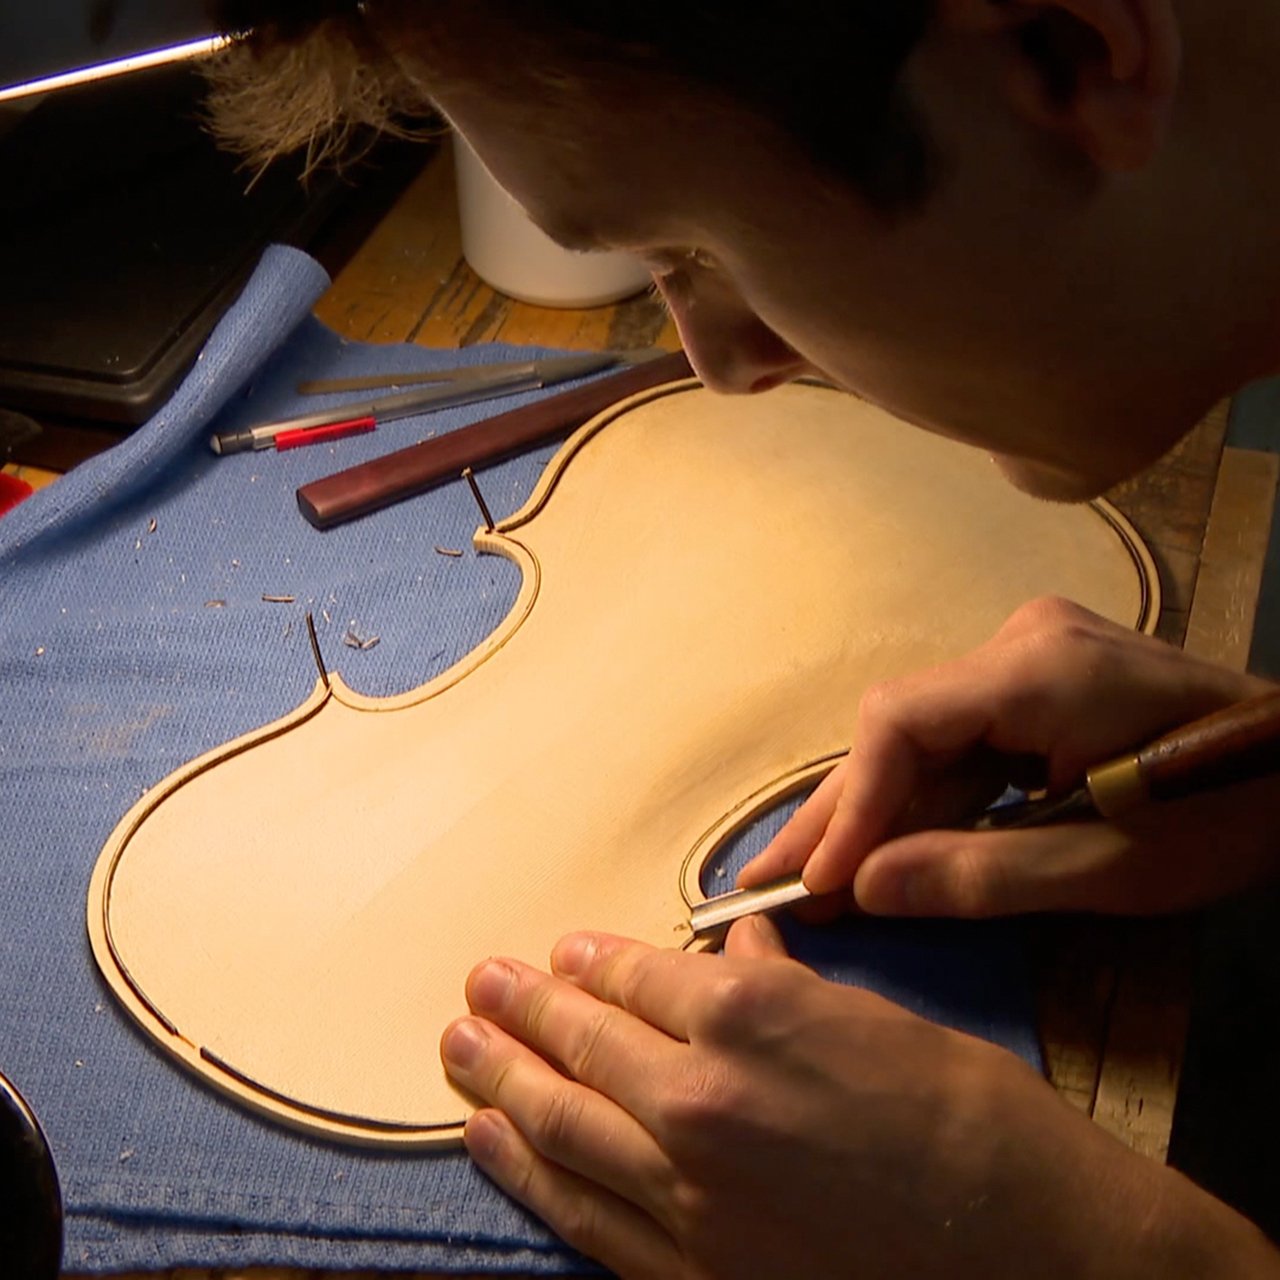 Learn to Make Professional Quality Violins